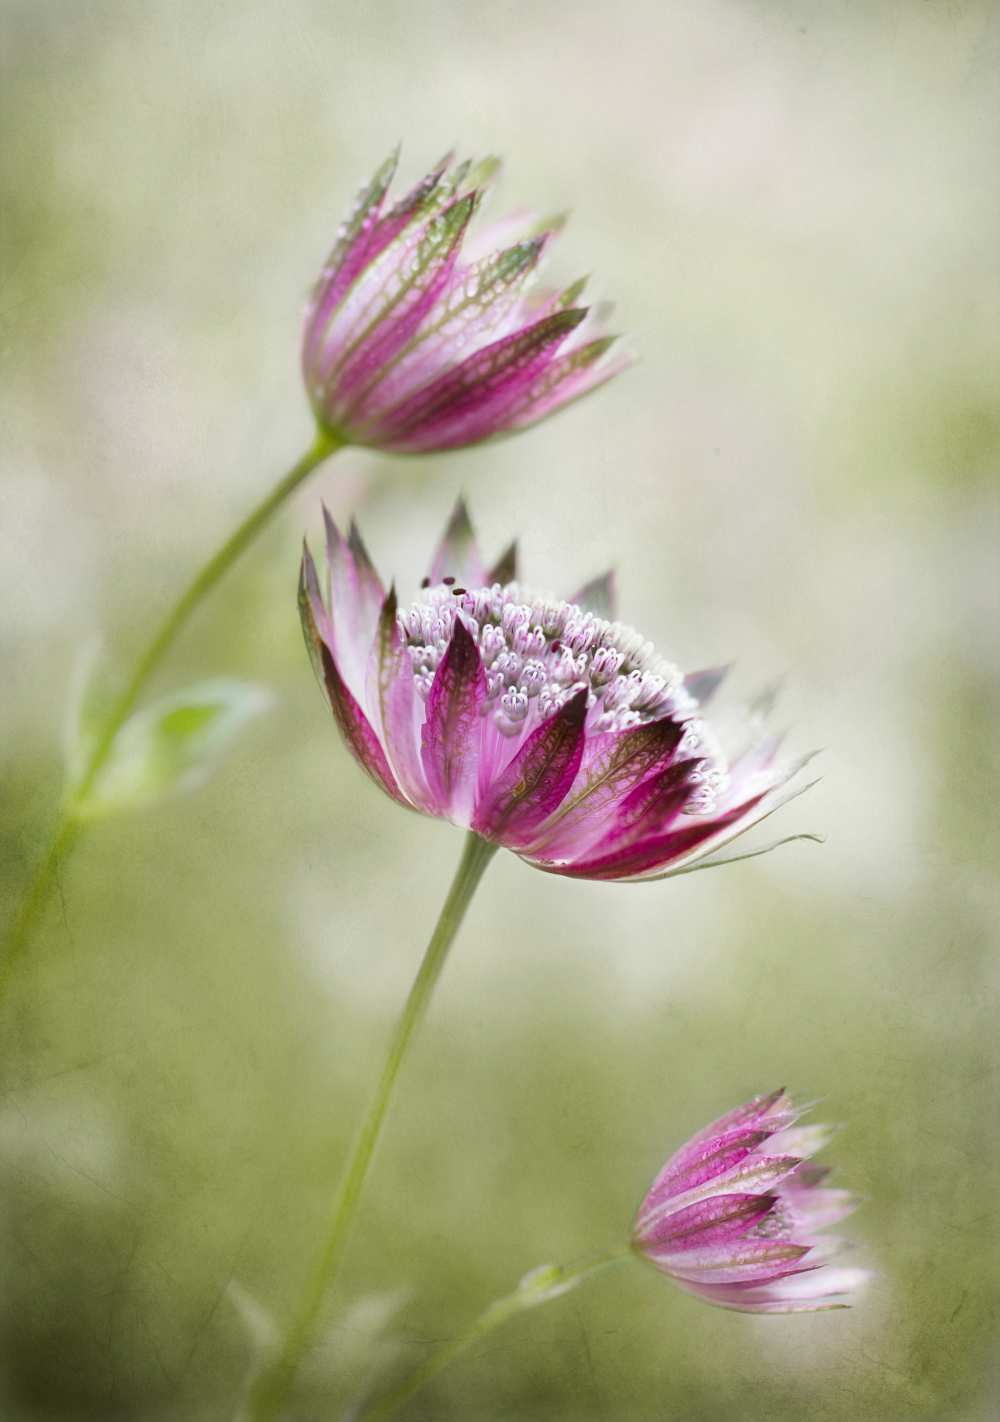 Astrantia from Mandy Disher